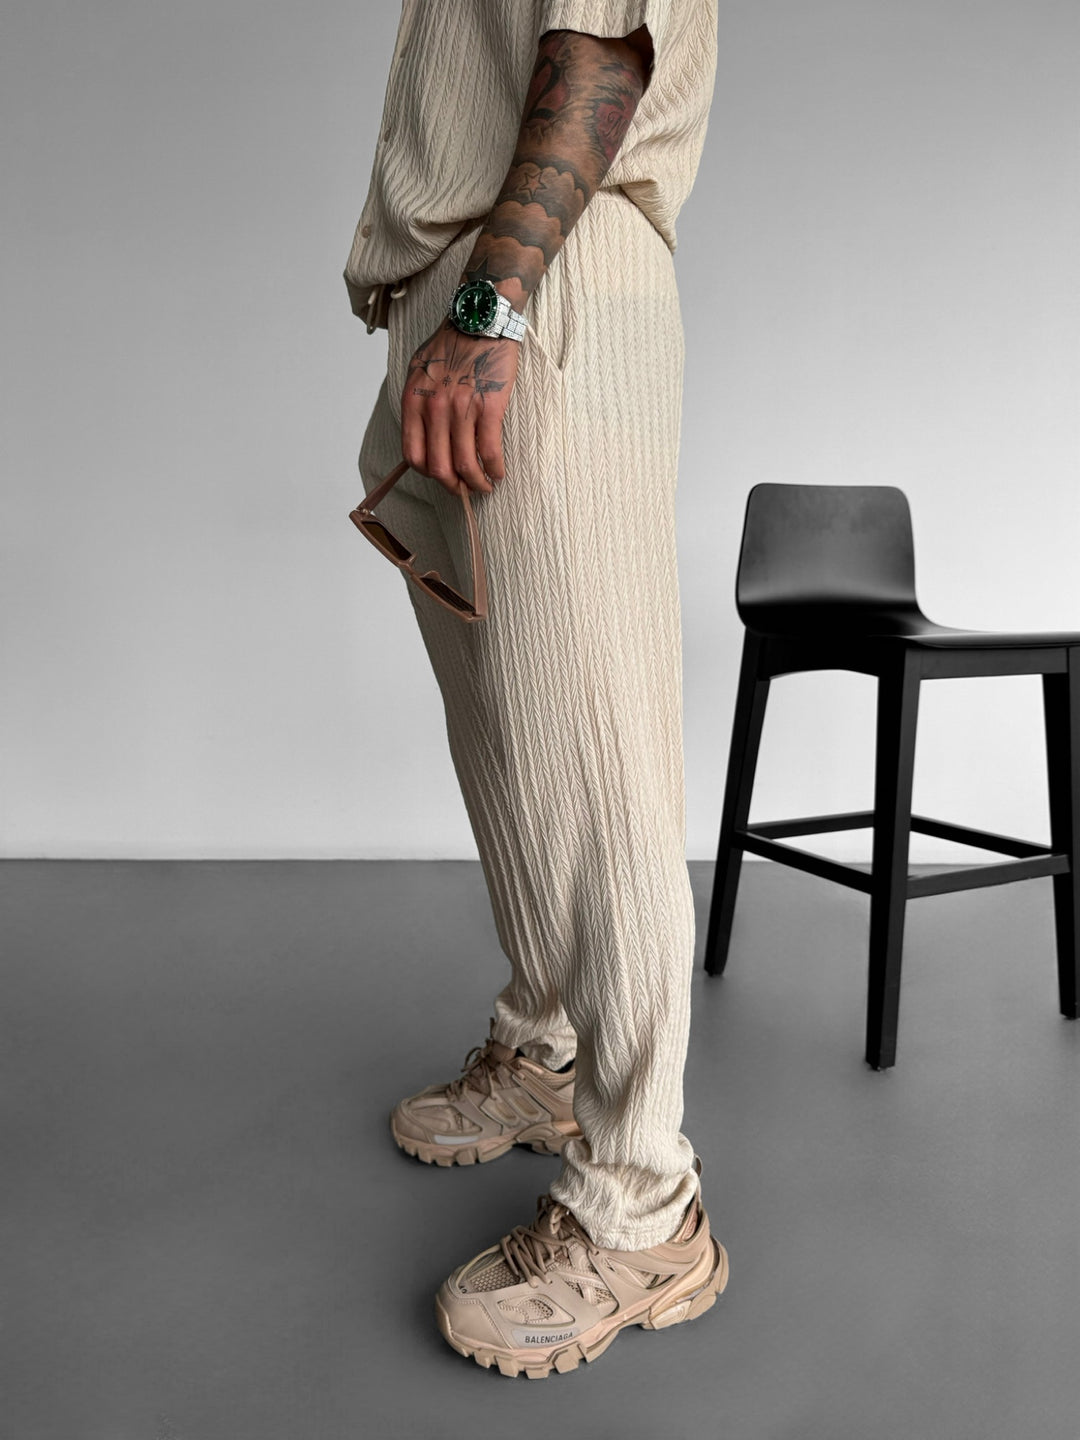 Loose Fit Structure Trousers - Beige